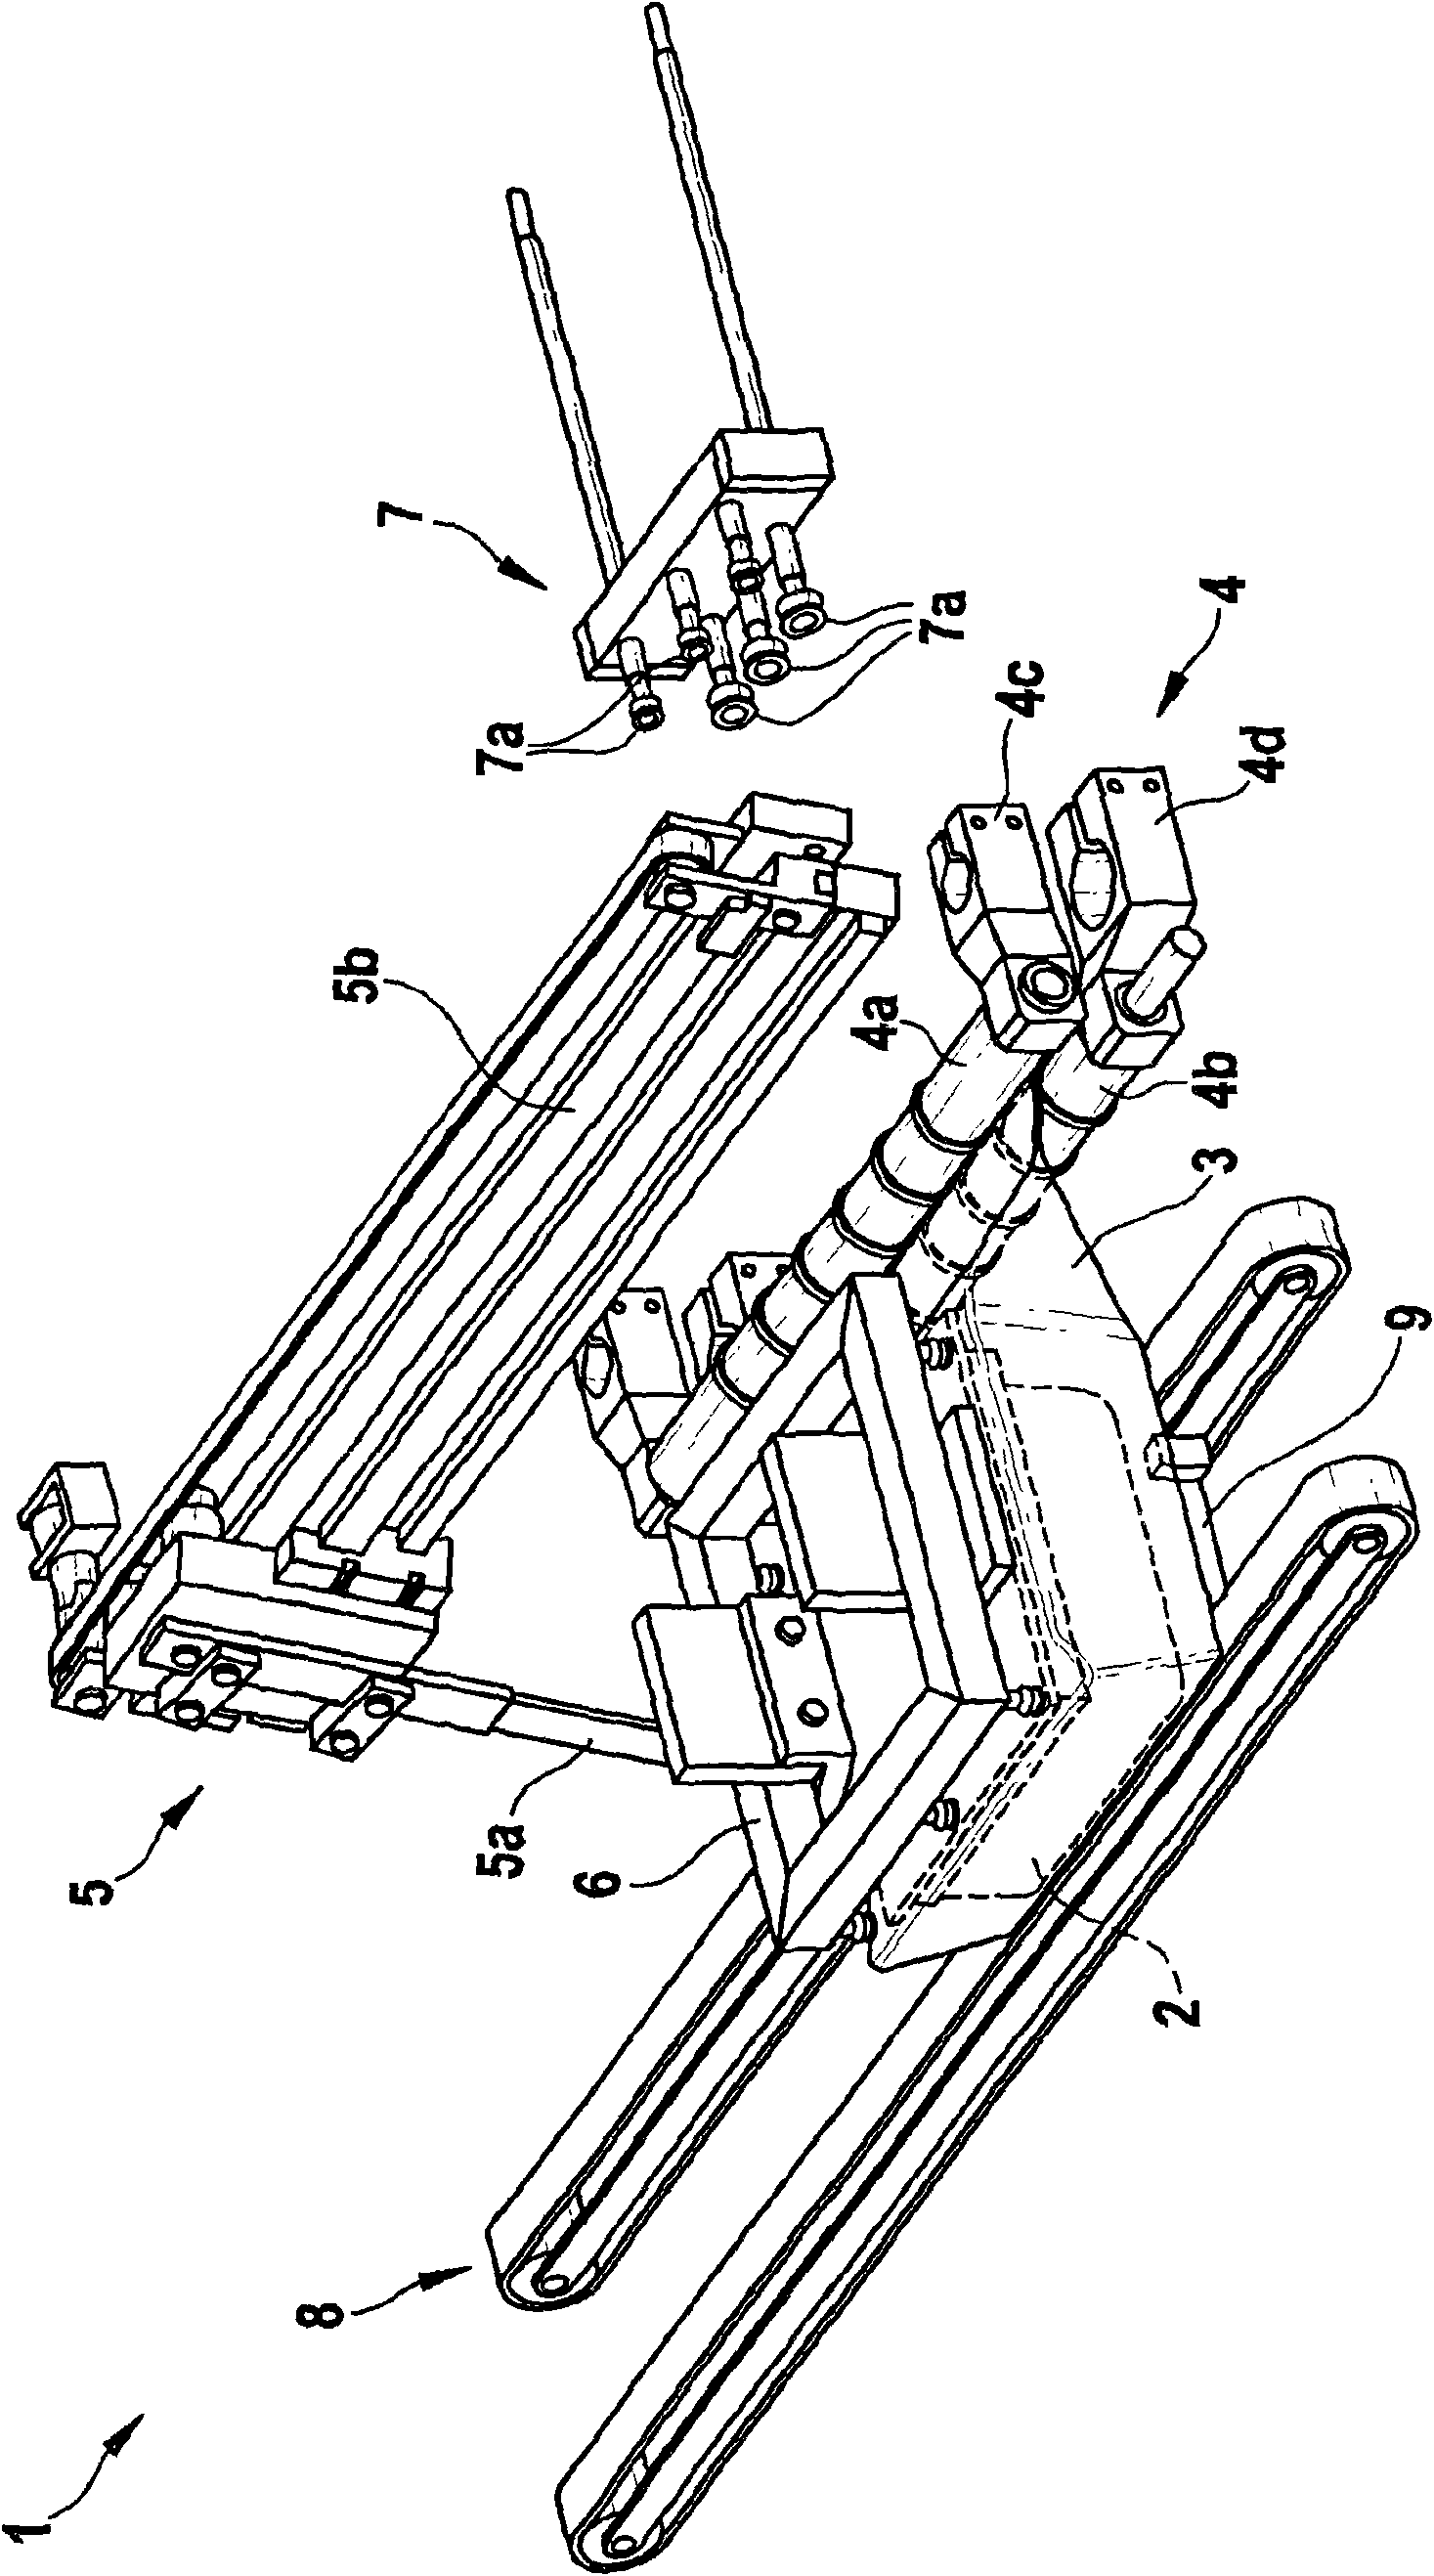 Device and method for removing a sterile object from a sterile packaging